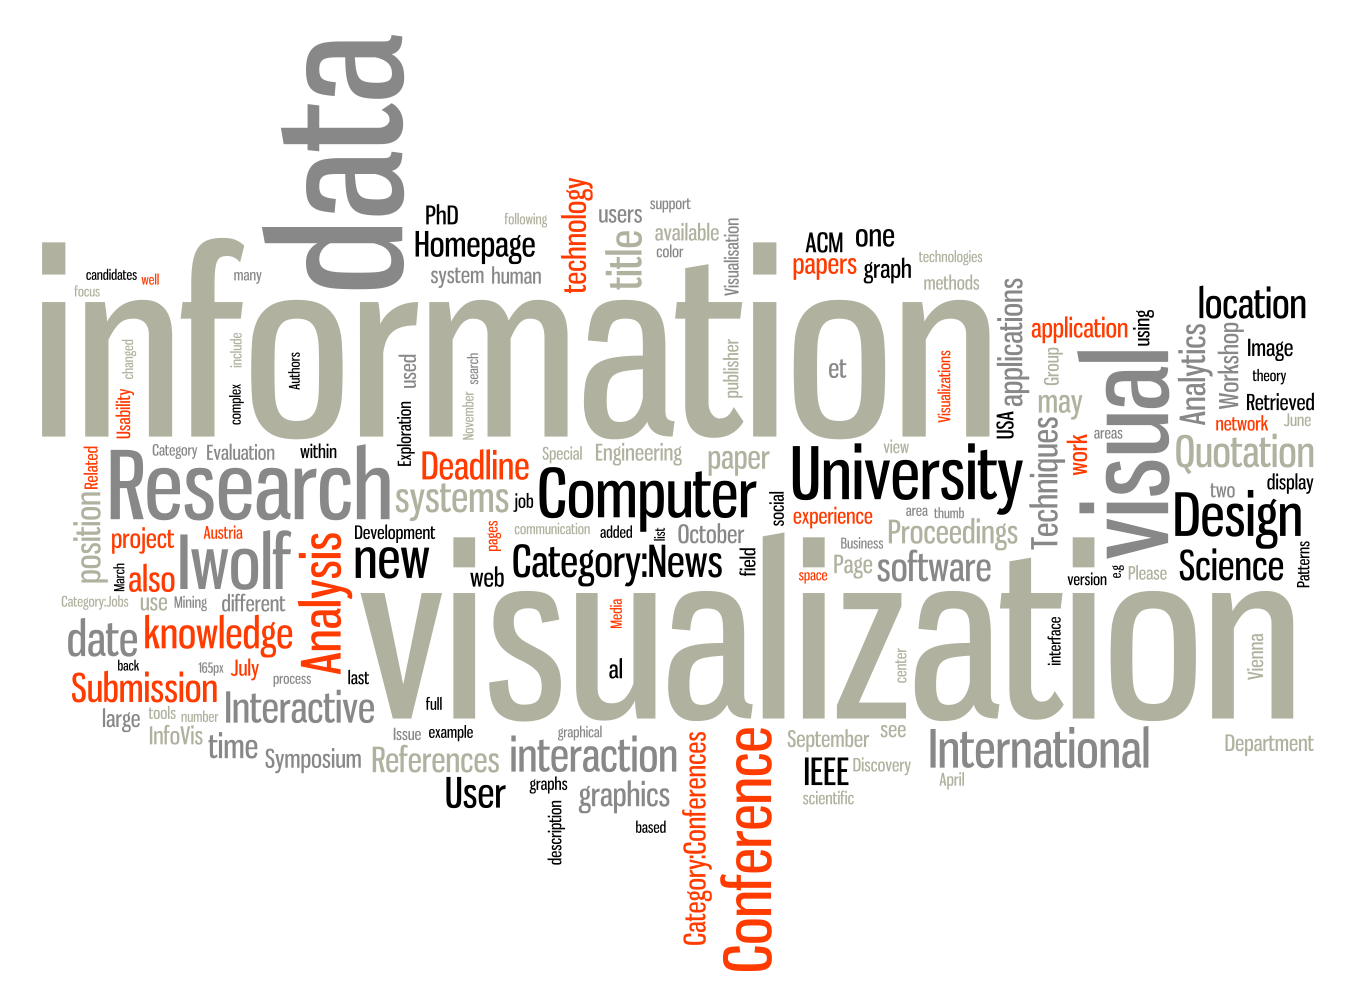 Infovis-wiki tagcloud 20090827.png